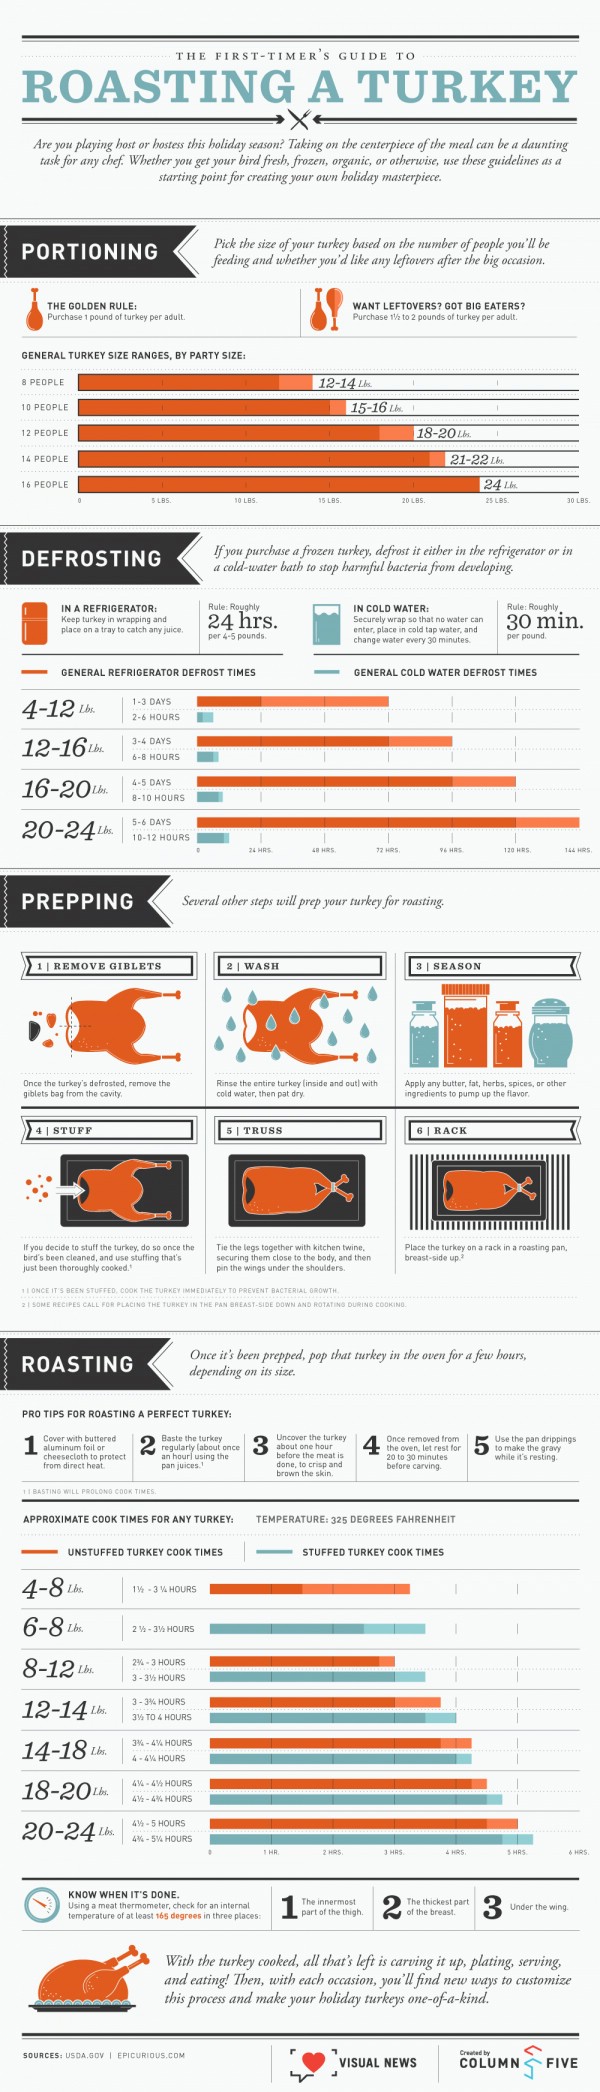 Turkey Roasting - 18 Professional Kitchen Infographics to Make Cooking Easier and Faster